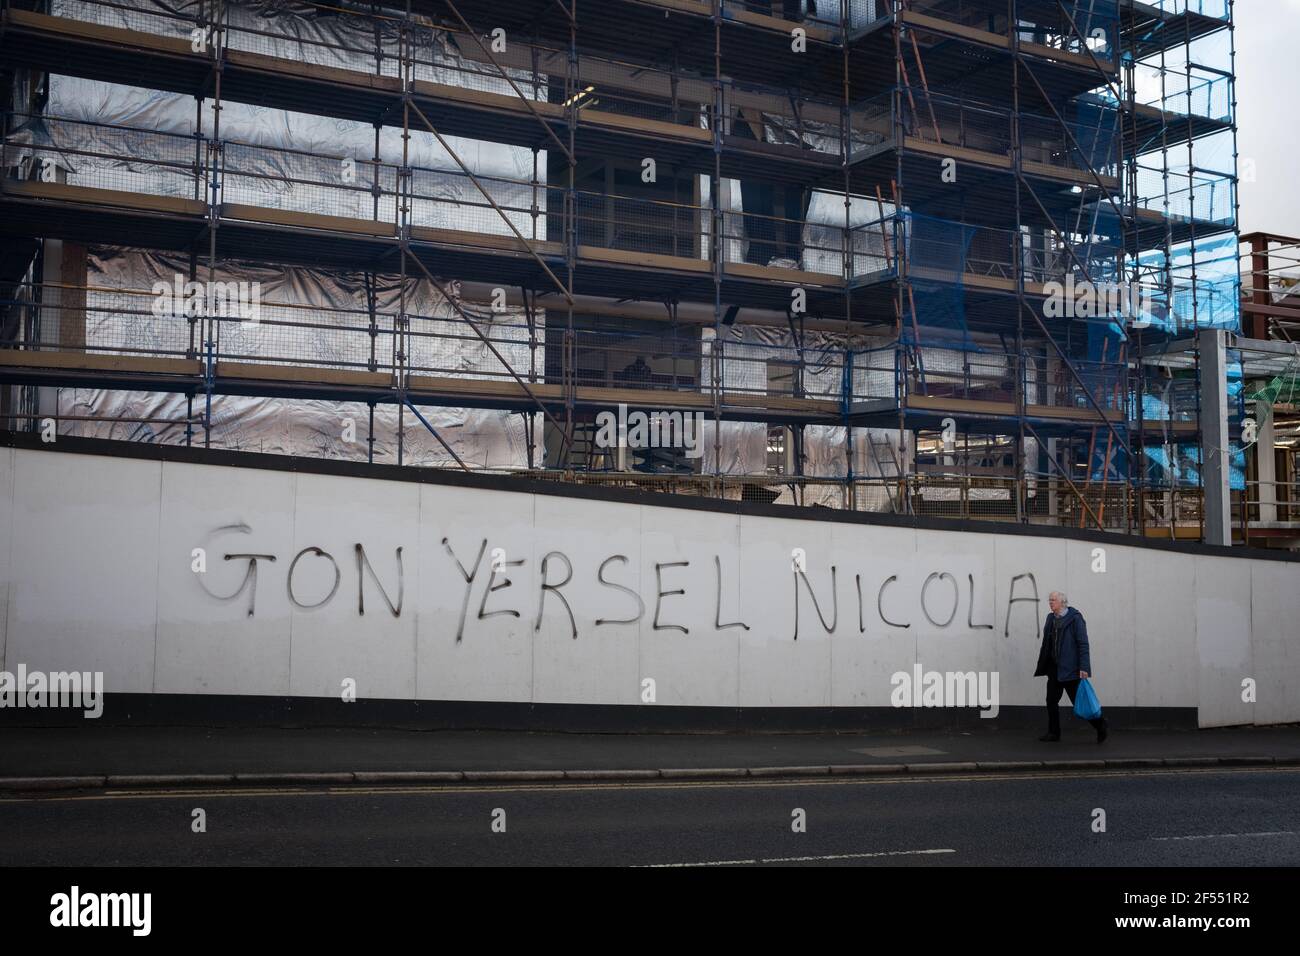 Glasgow, UK, on 24 March 2021. ÔGon yersel NicolaÕ graffiti appears in support of First Minister Nicola Sturgeon, on a building site wall, as the Scottish political parties begin their campaigning for the 6th May elections to the Scottish Parliament. Photo credit: Jeremy Sutton-Hibbert/Alamy Live News. Stock Photo